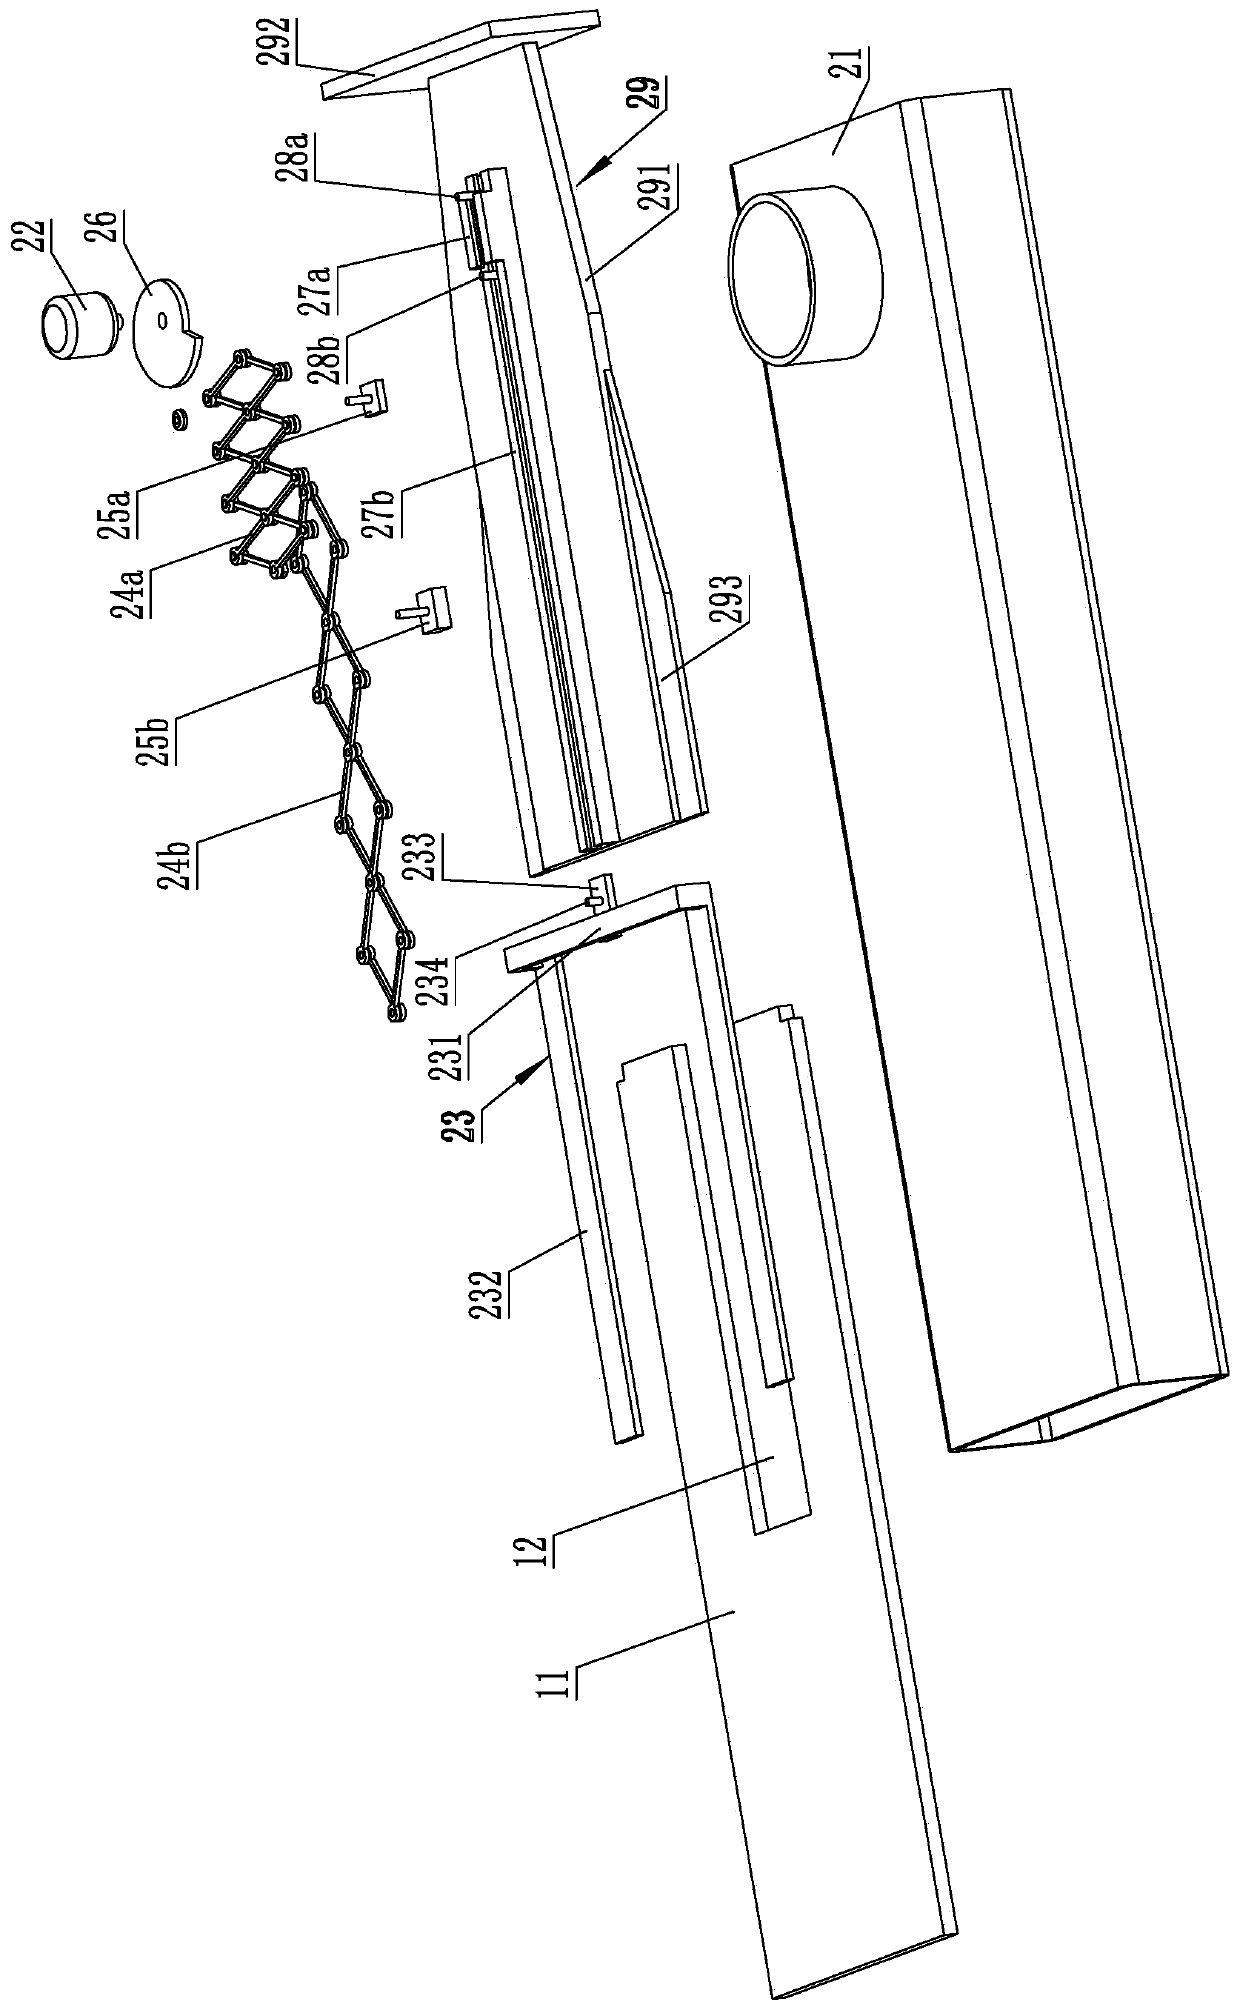 Bandage structure and head-mounted equipment